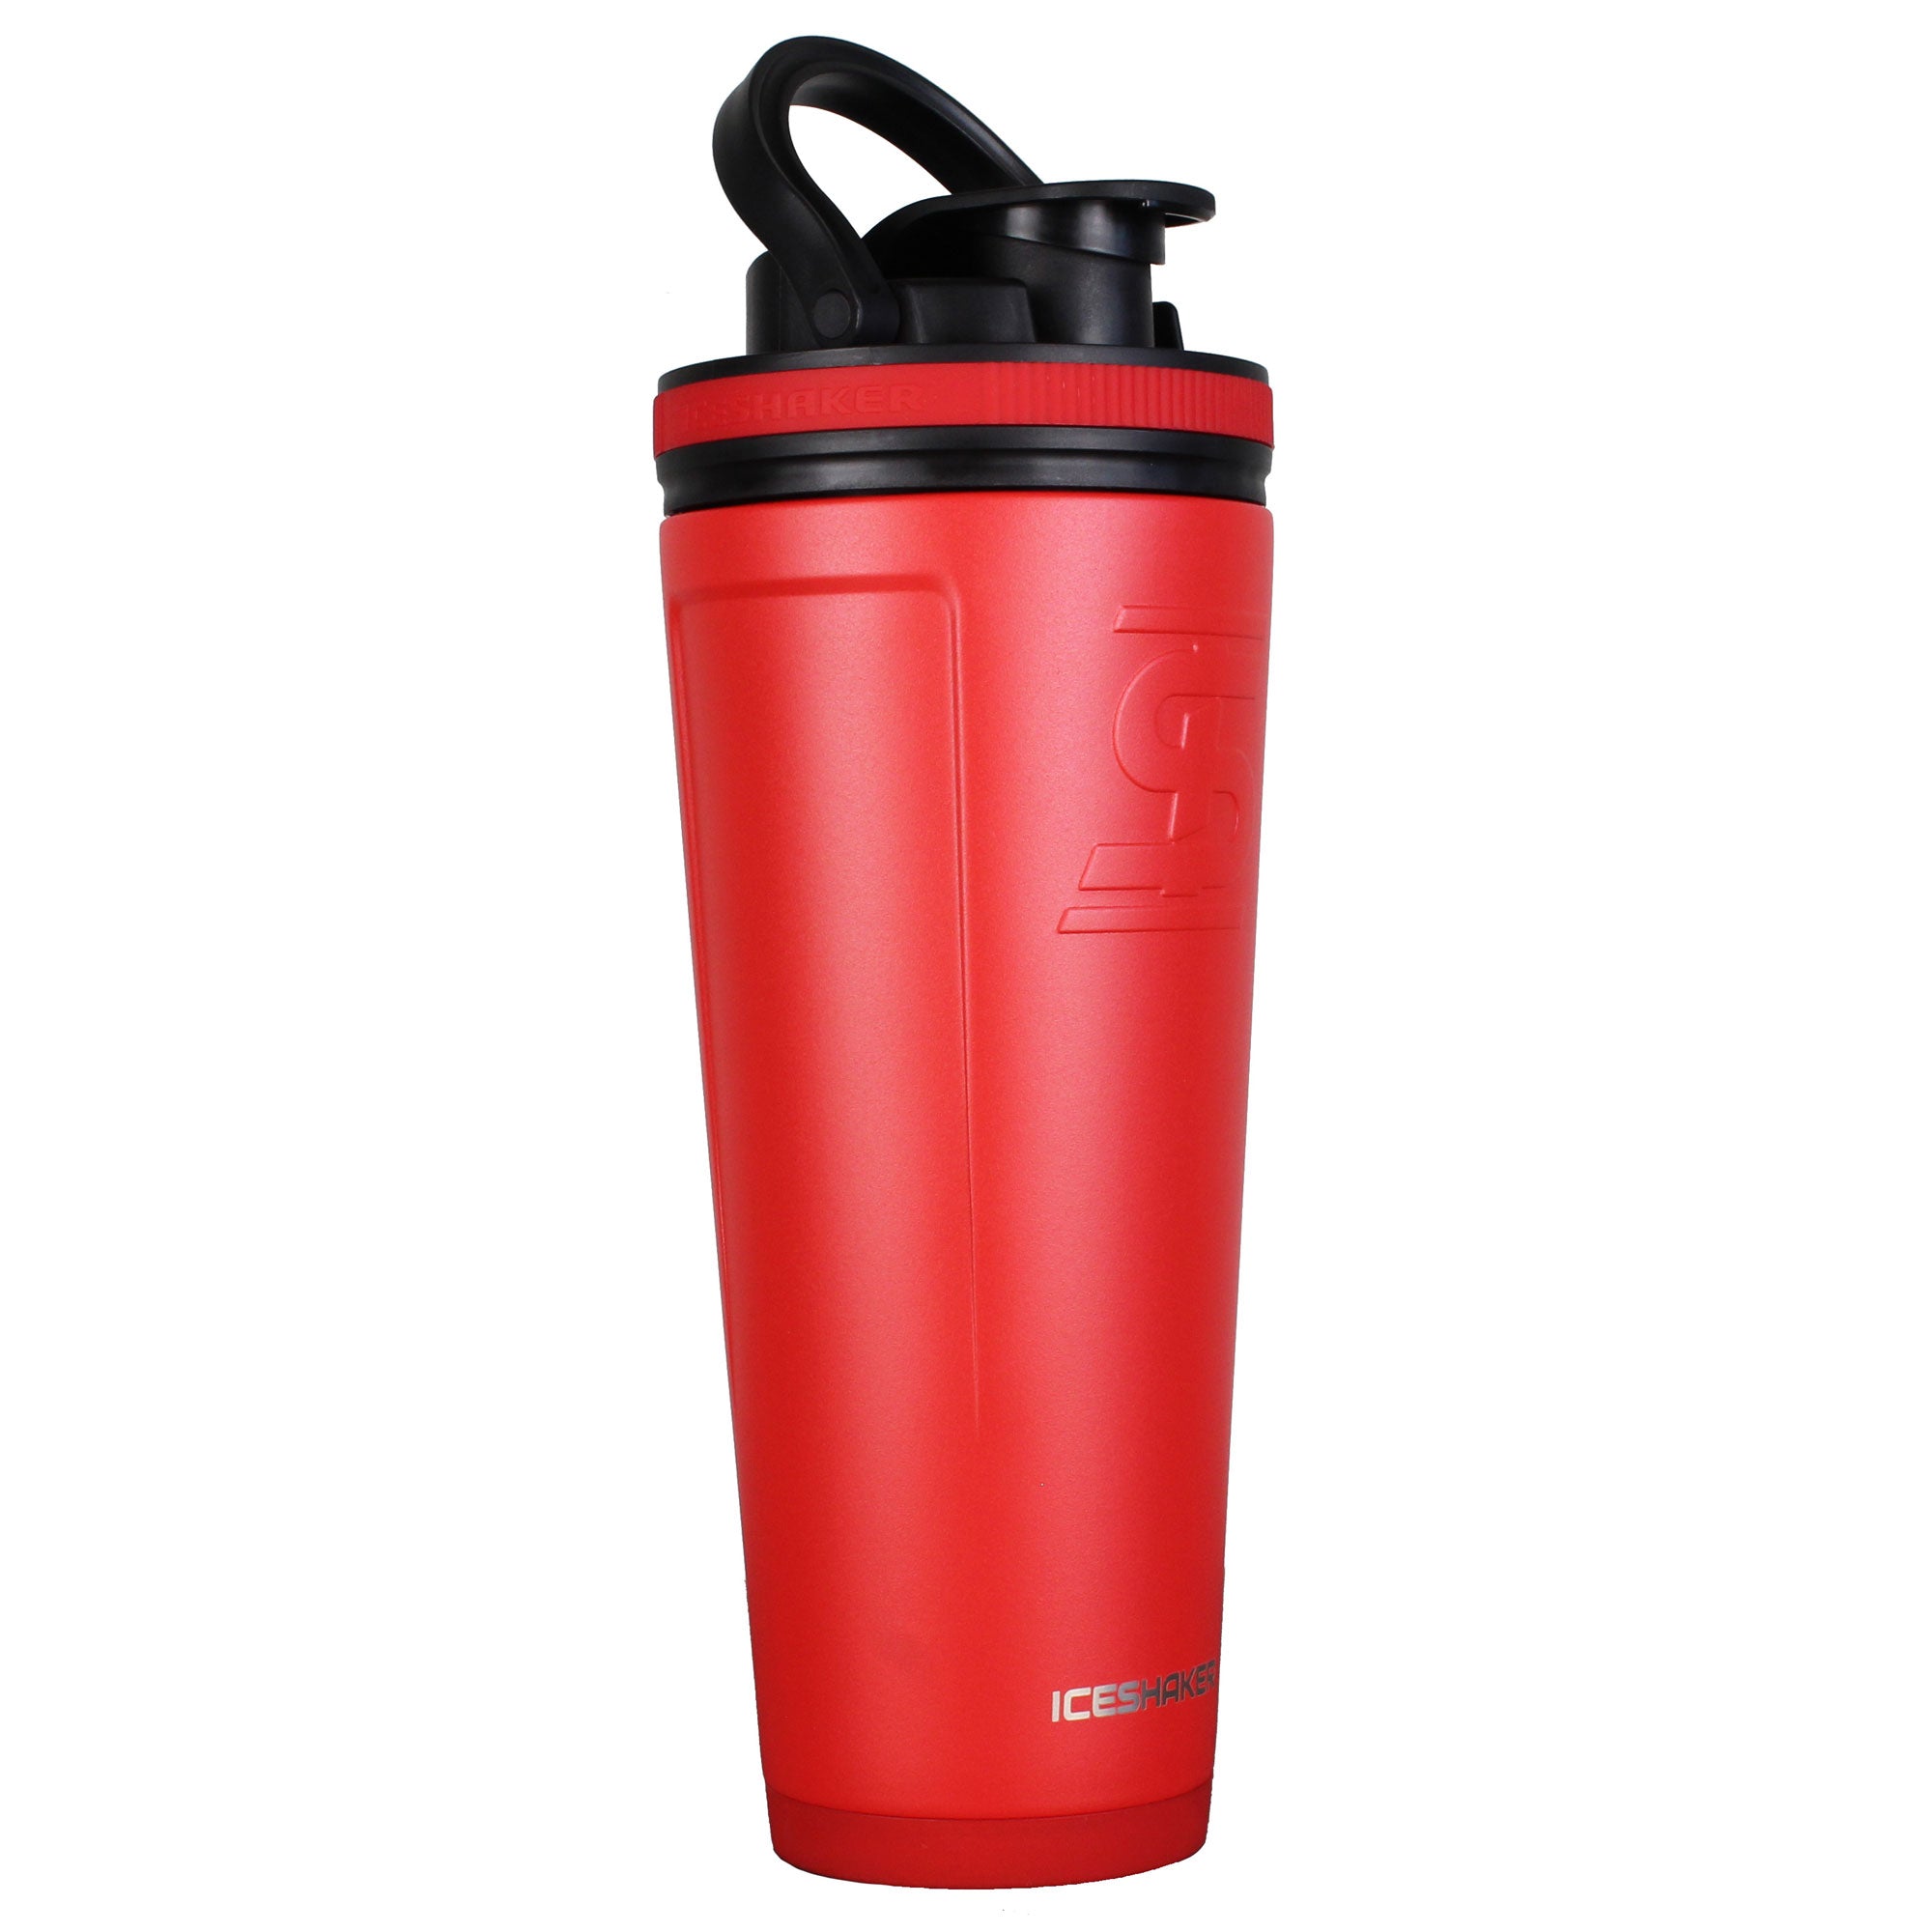 Ambrosia Collective Black & Red Shaker Bottle